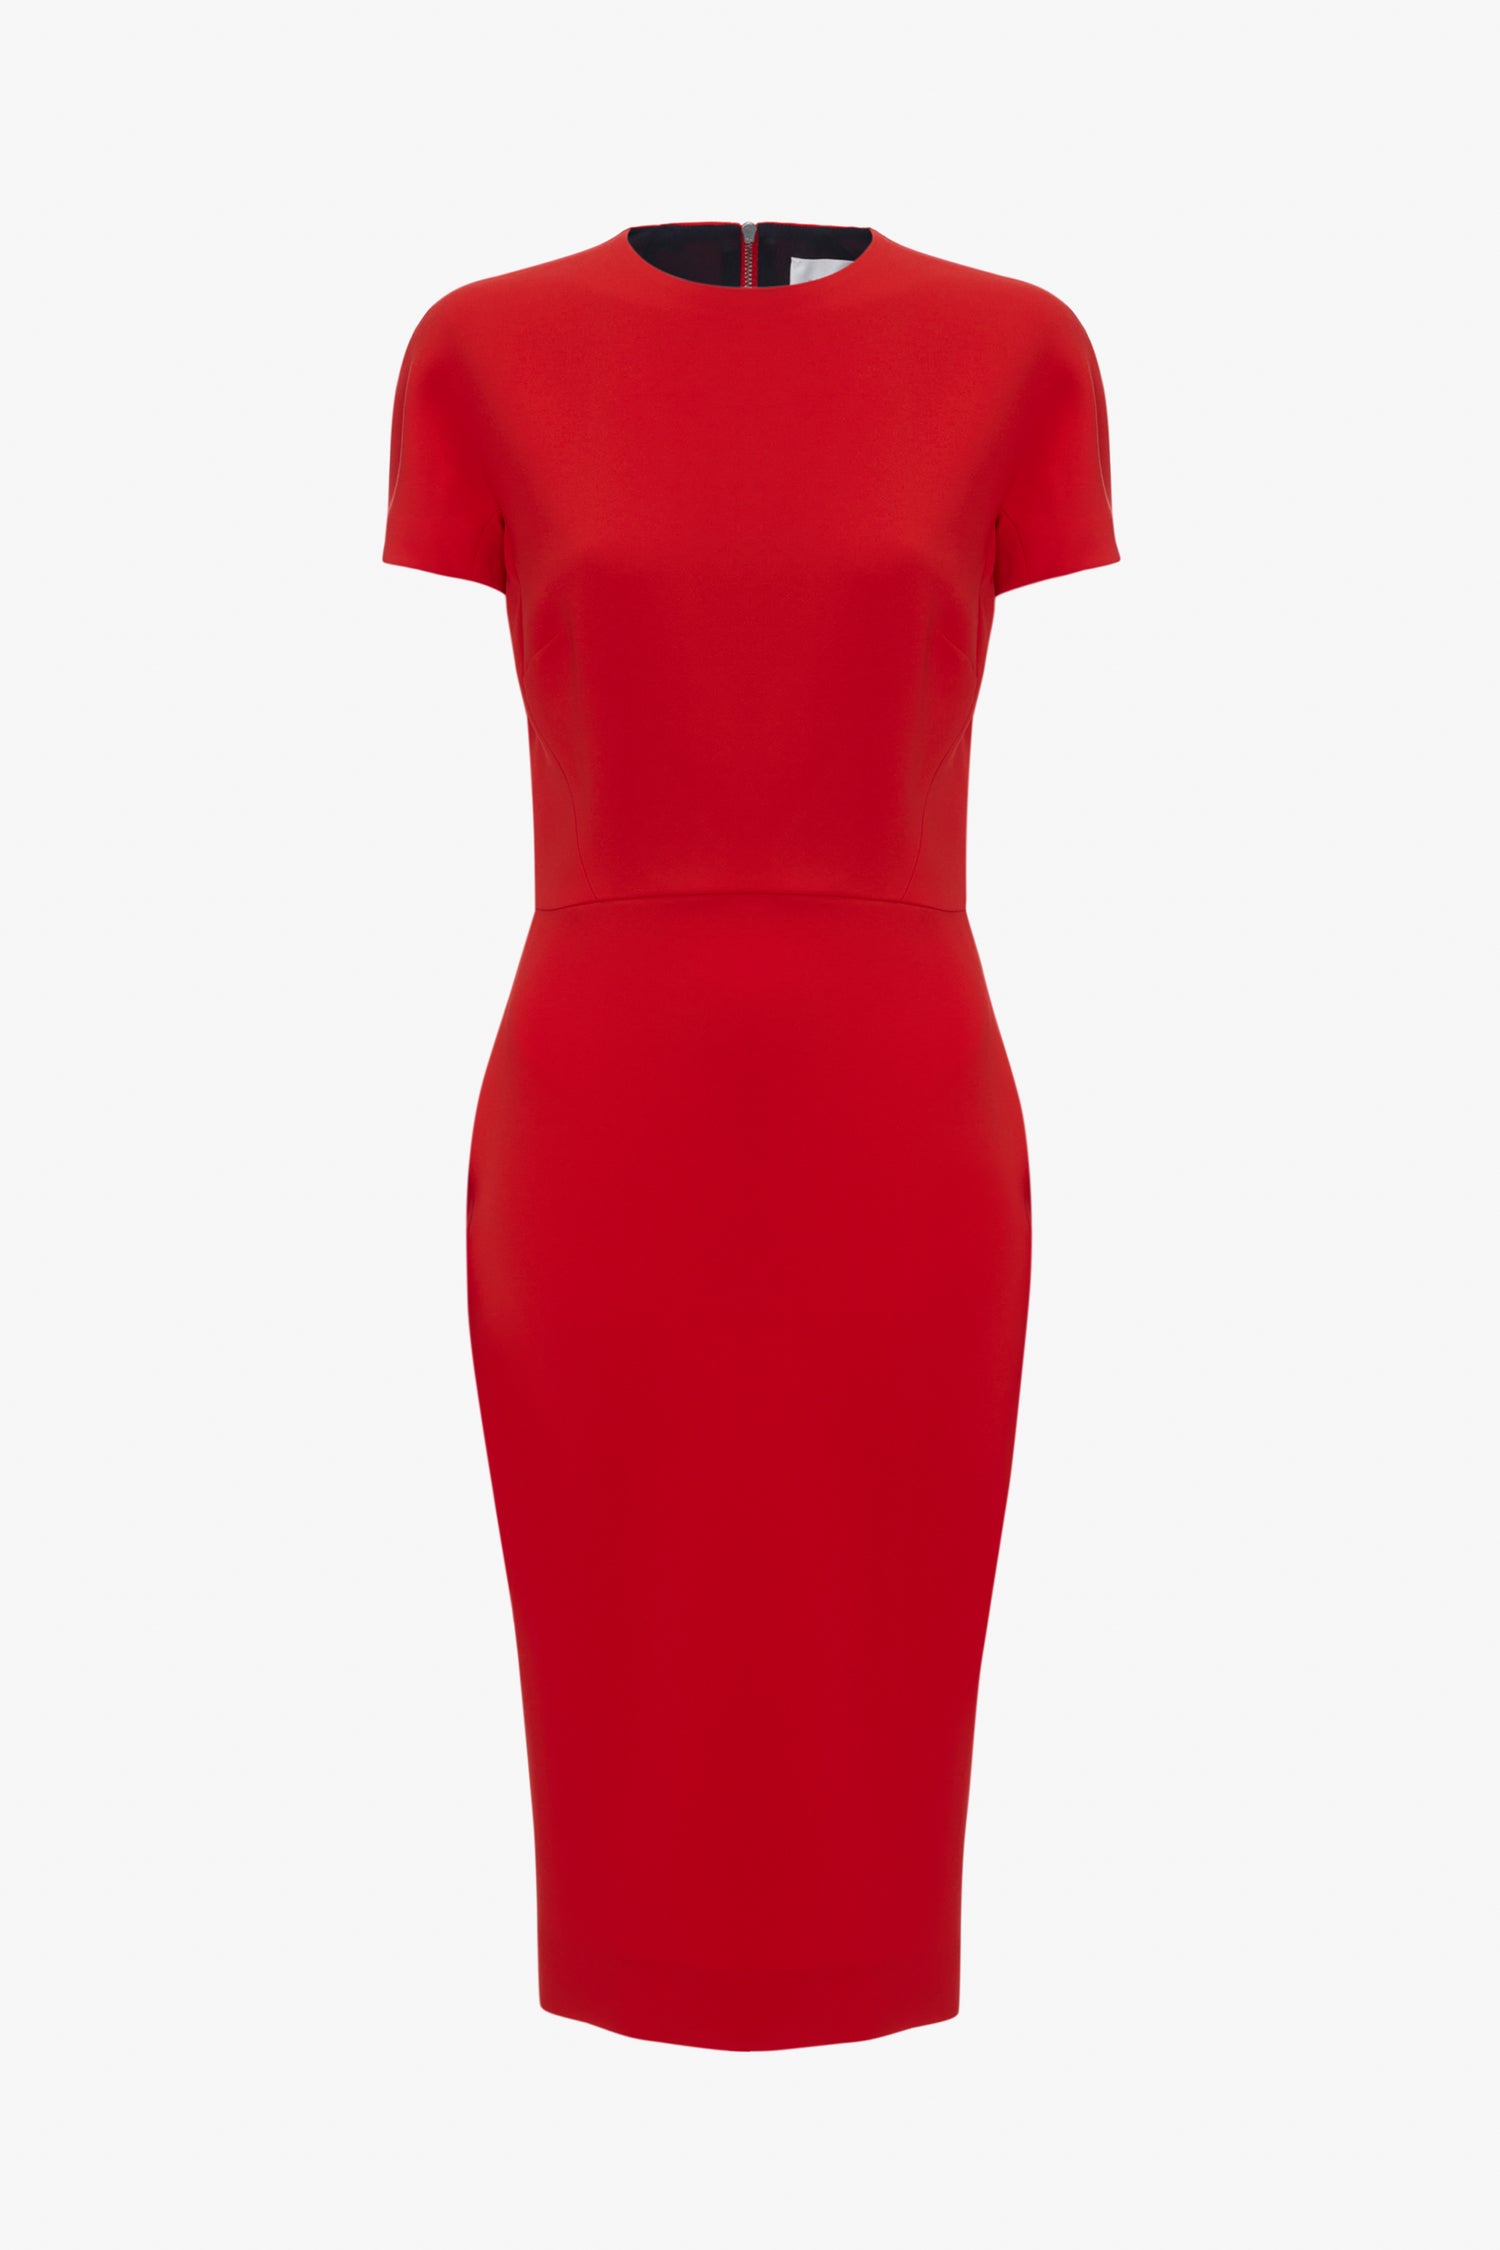 A Victoria Beckham red knee-length fitted T-shirt dress with short sleeves and a round neckline, displayed on a plain white background.